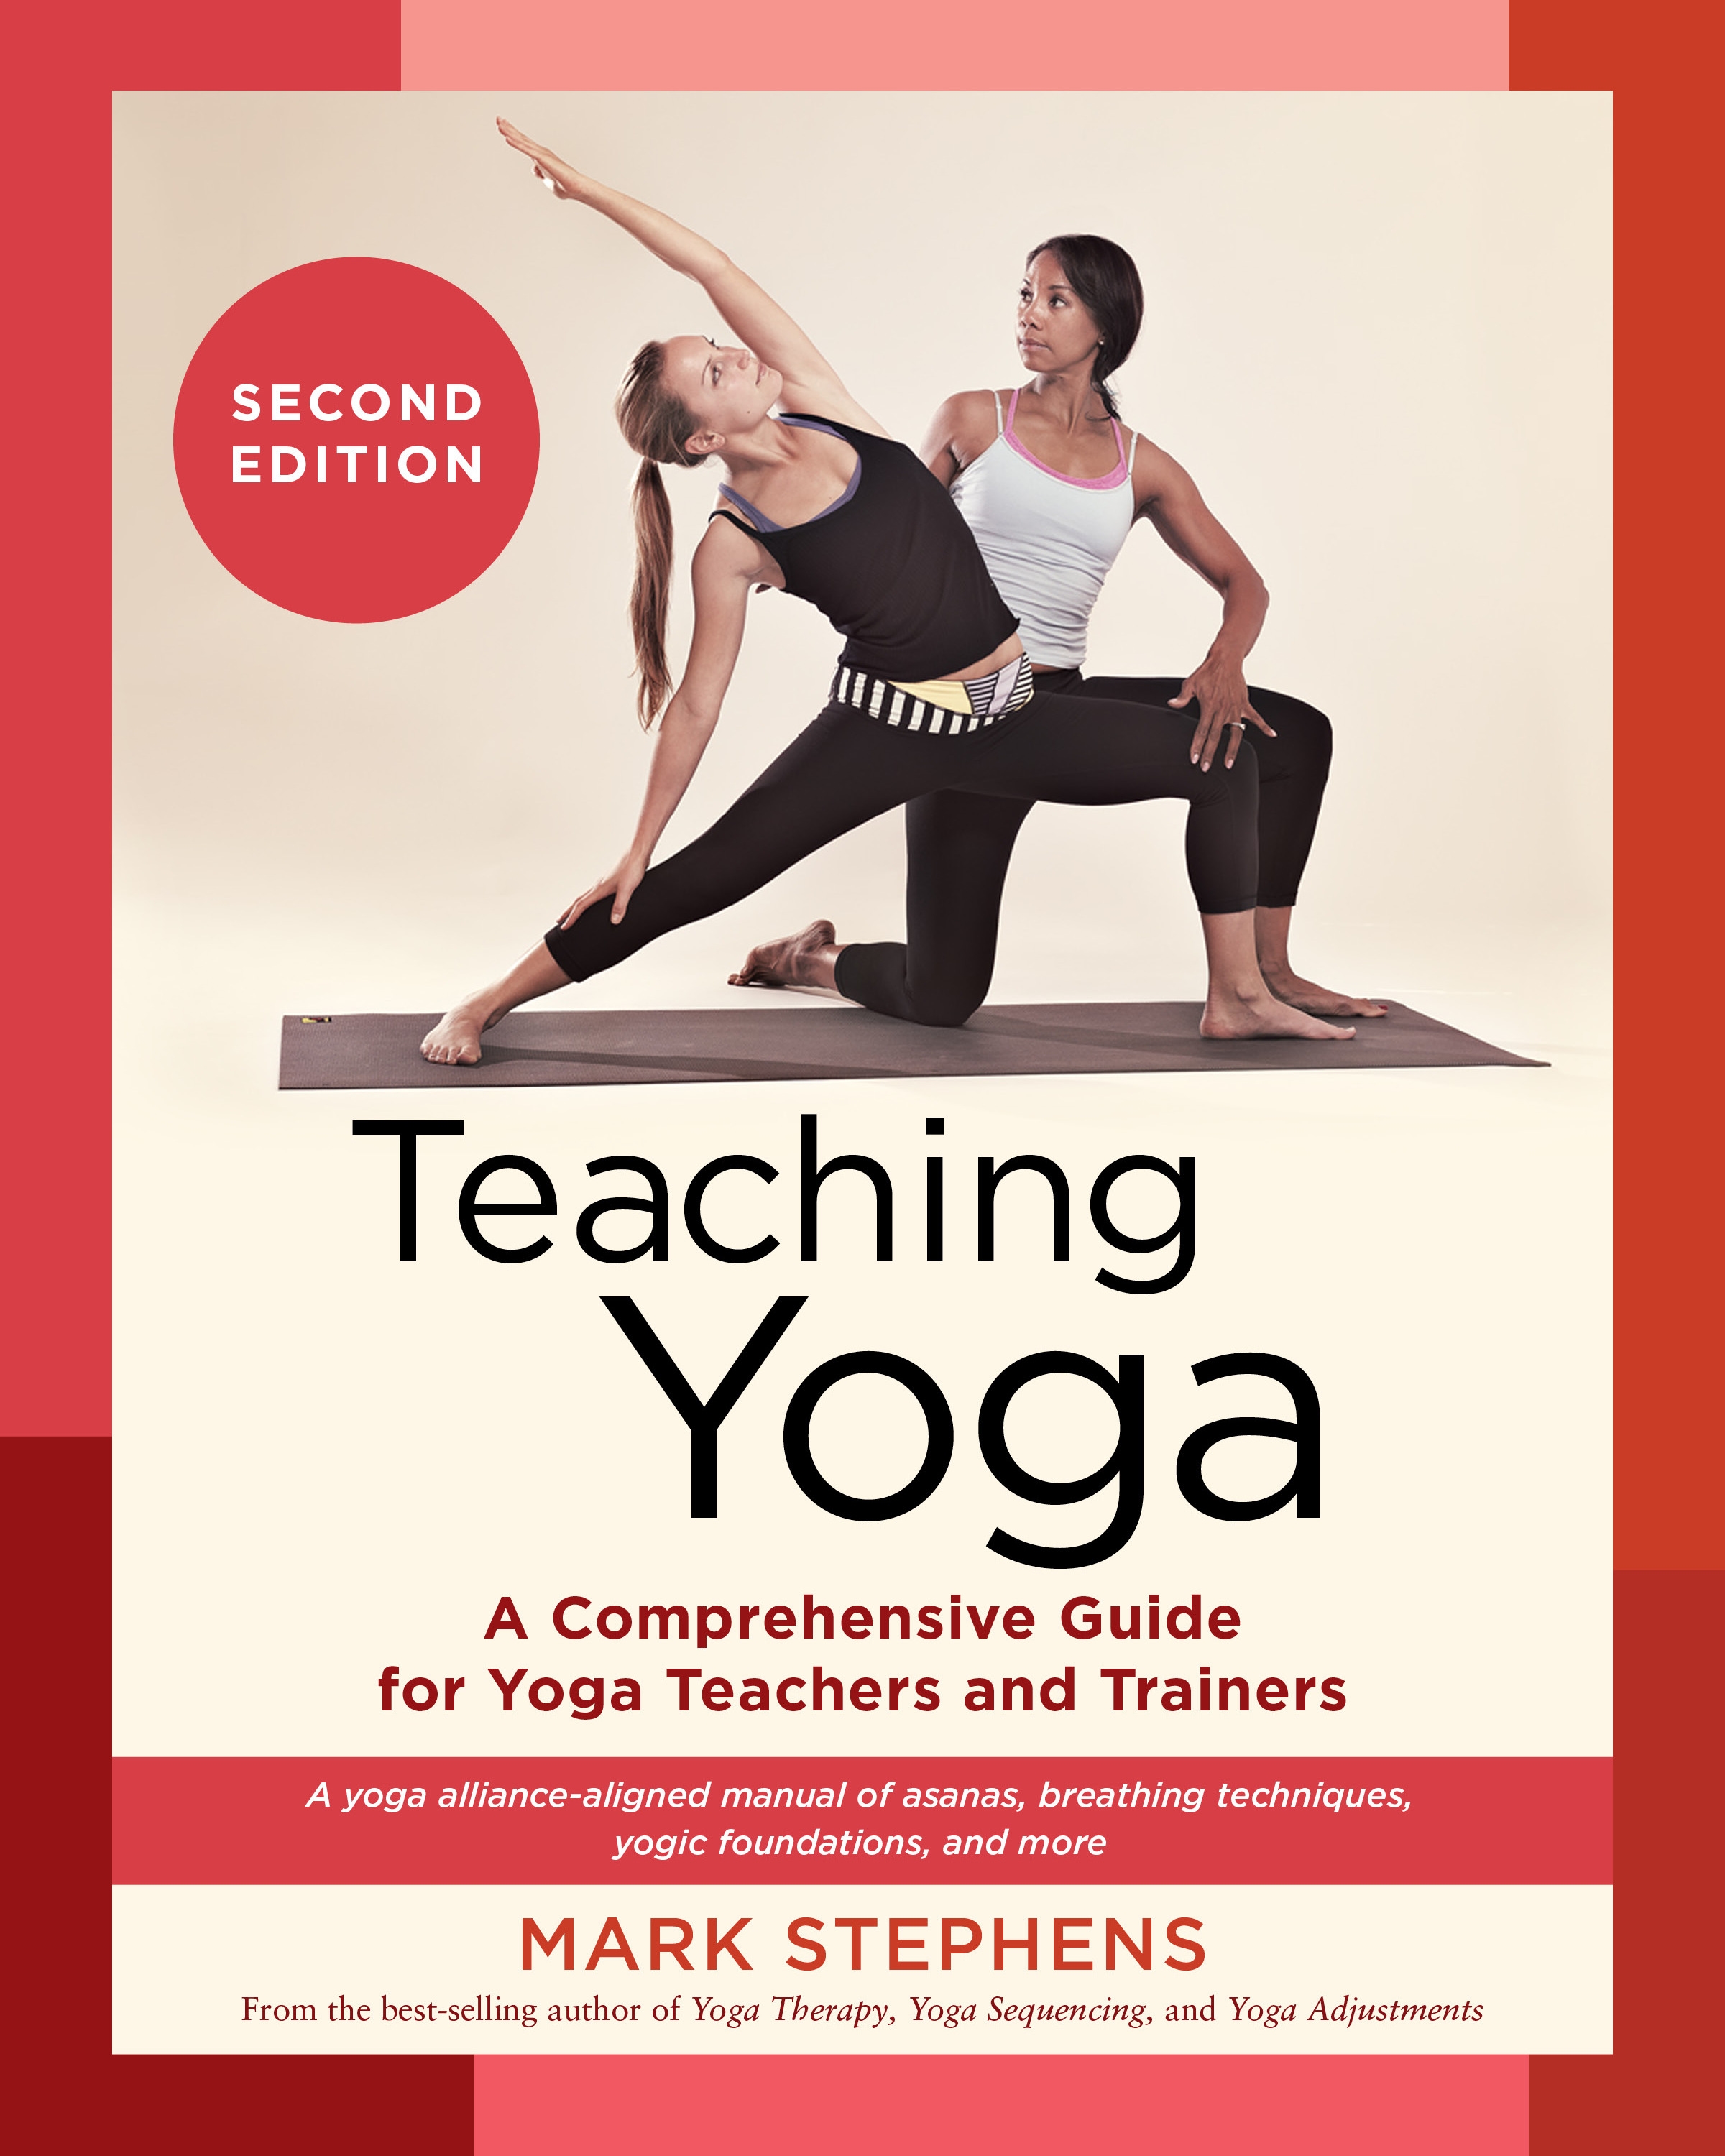 Teaching Yoga, Second Edition by Mark Stephens - Penguin Books New Zealand